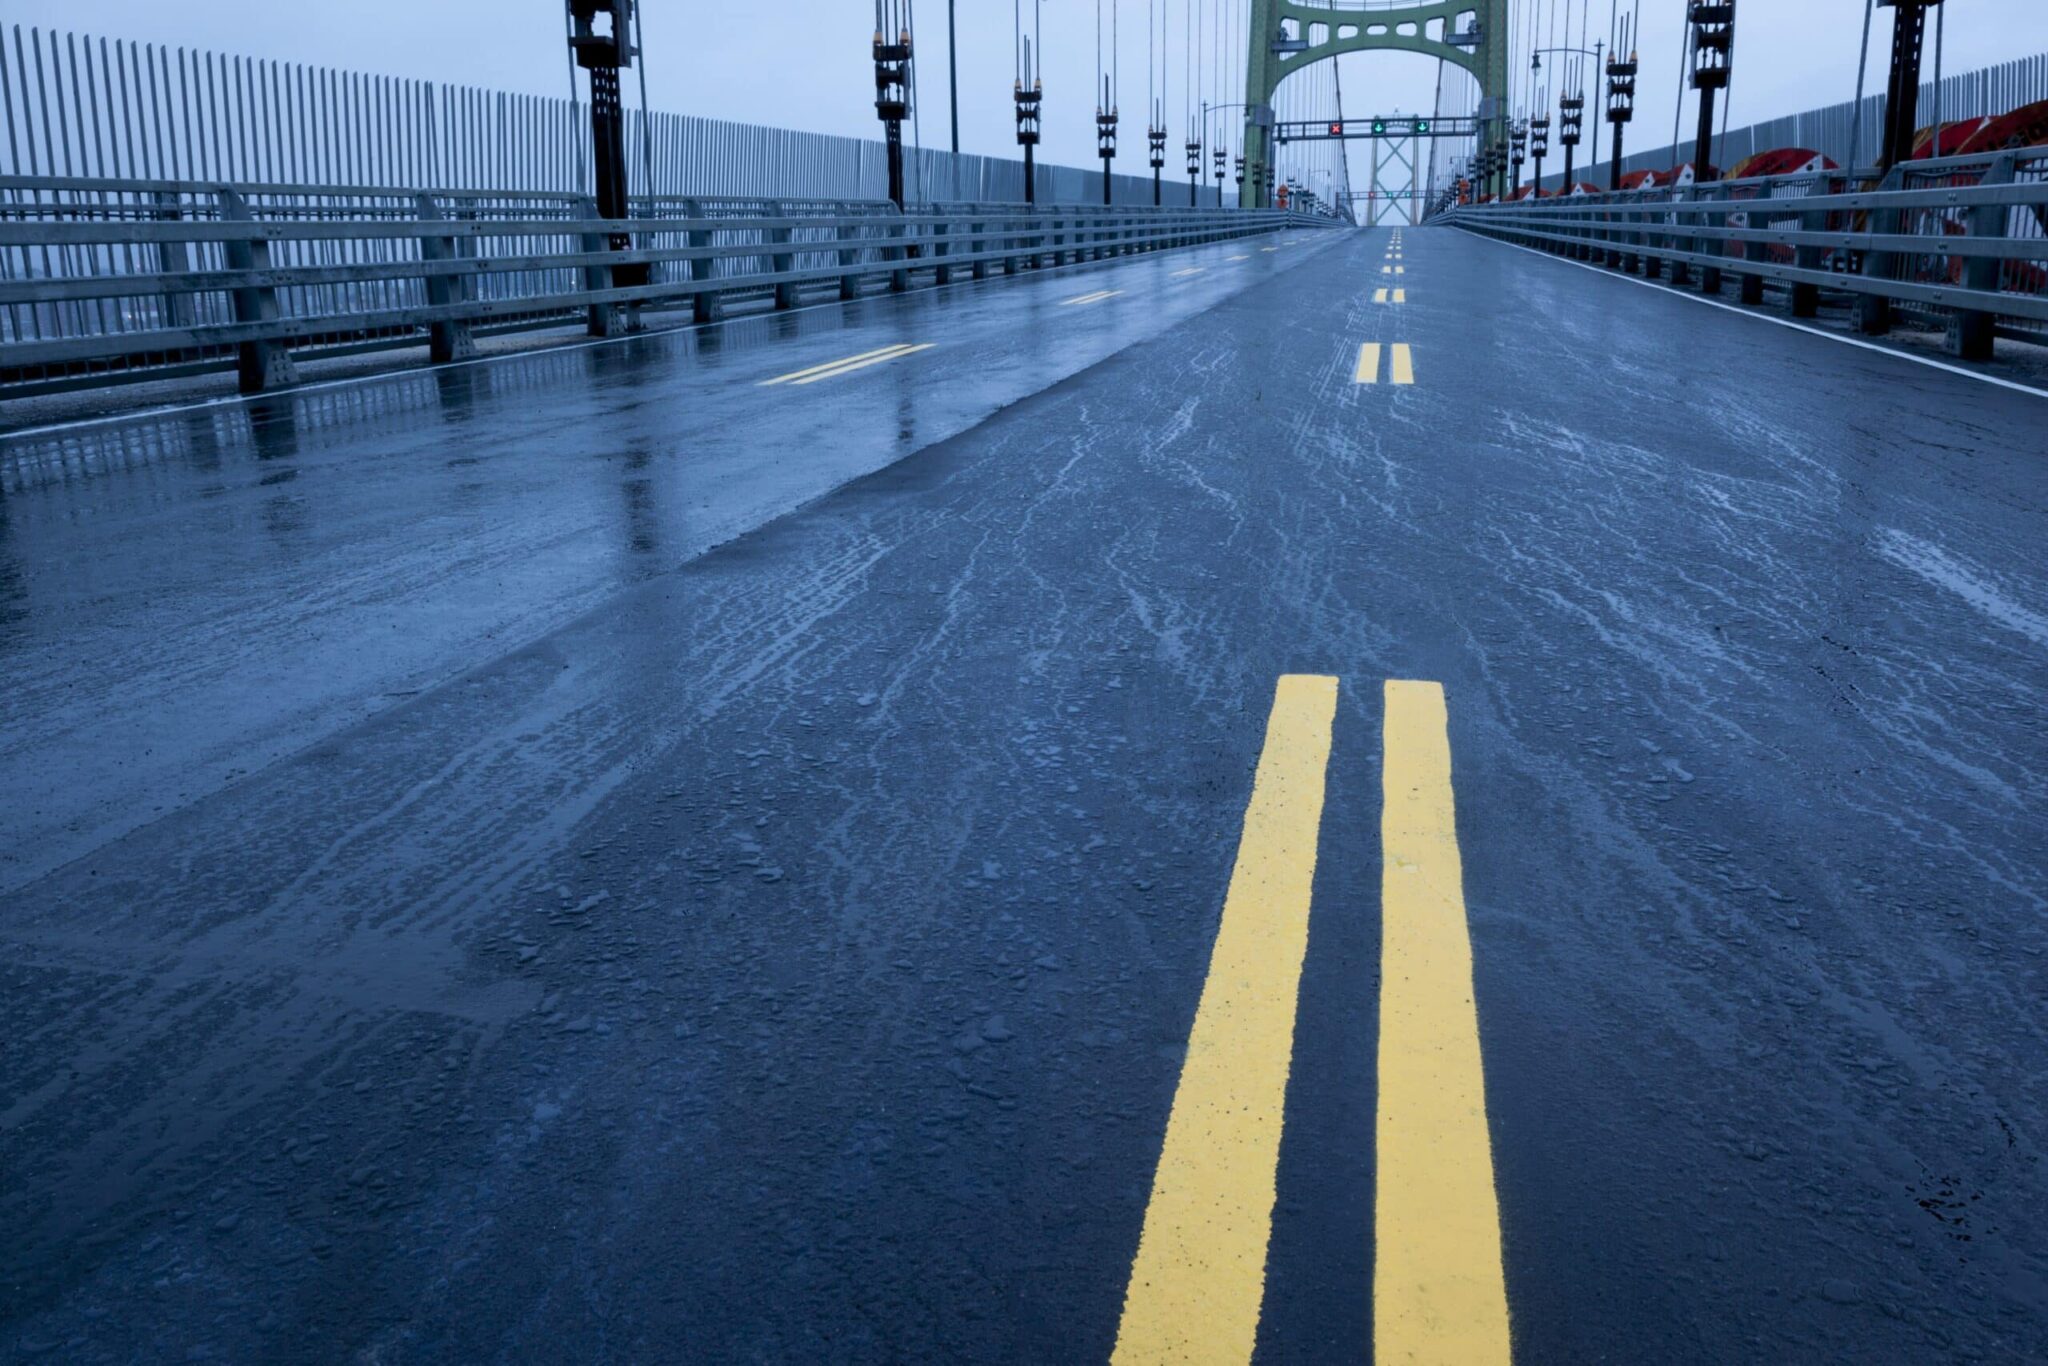 Bright lines are seen painted on the empty, rain-soaked deck of the Macdonald Bridge.